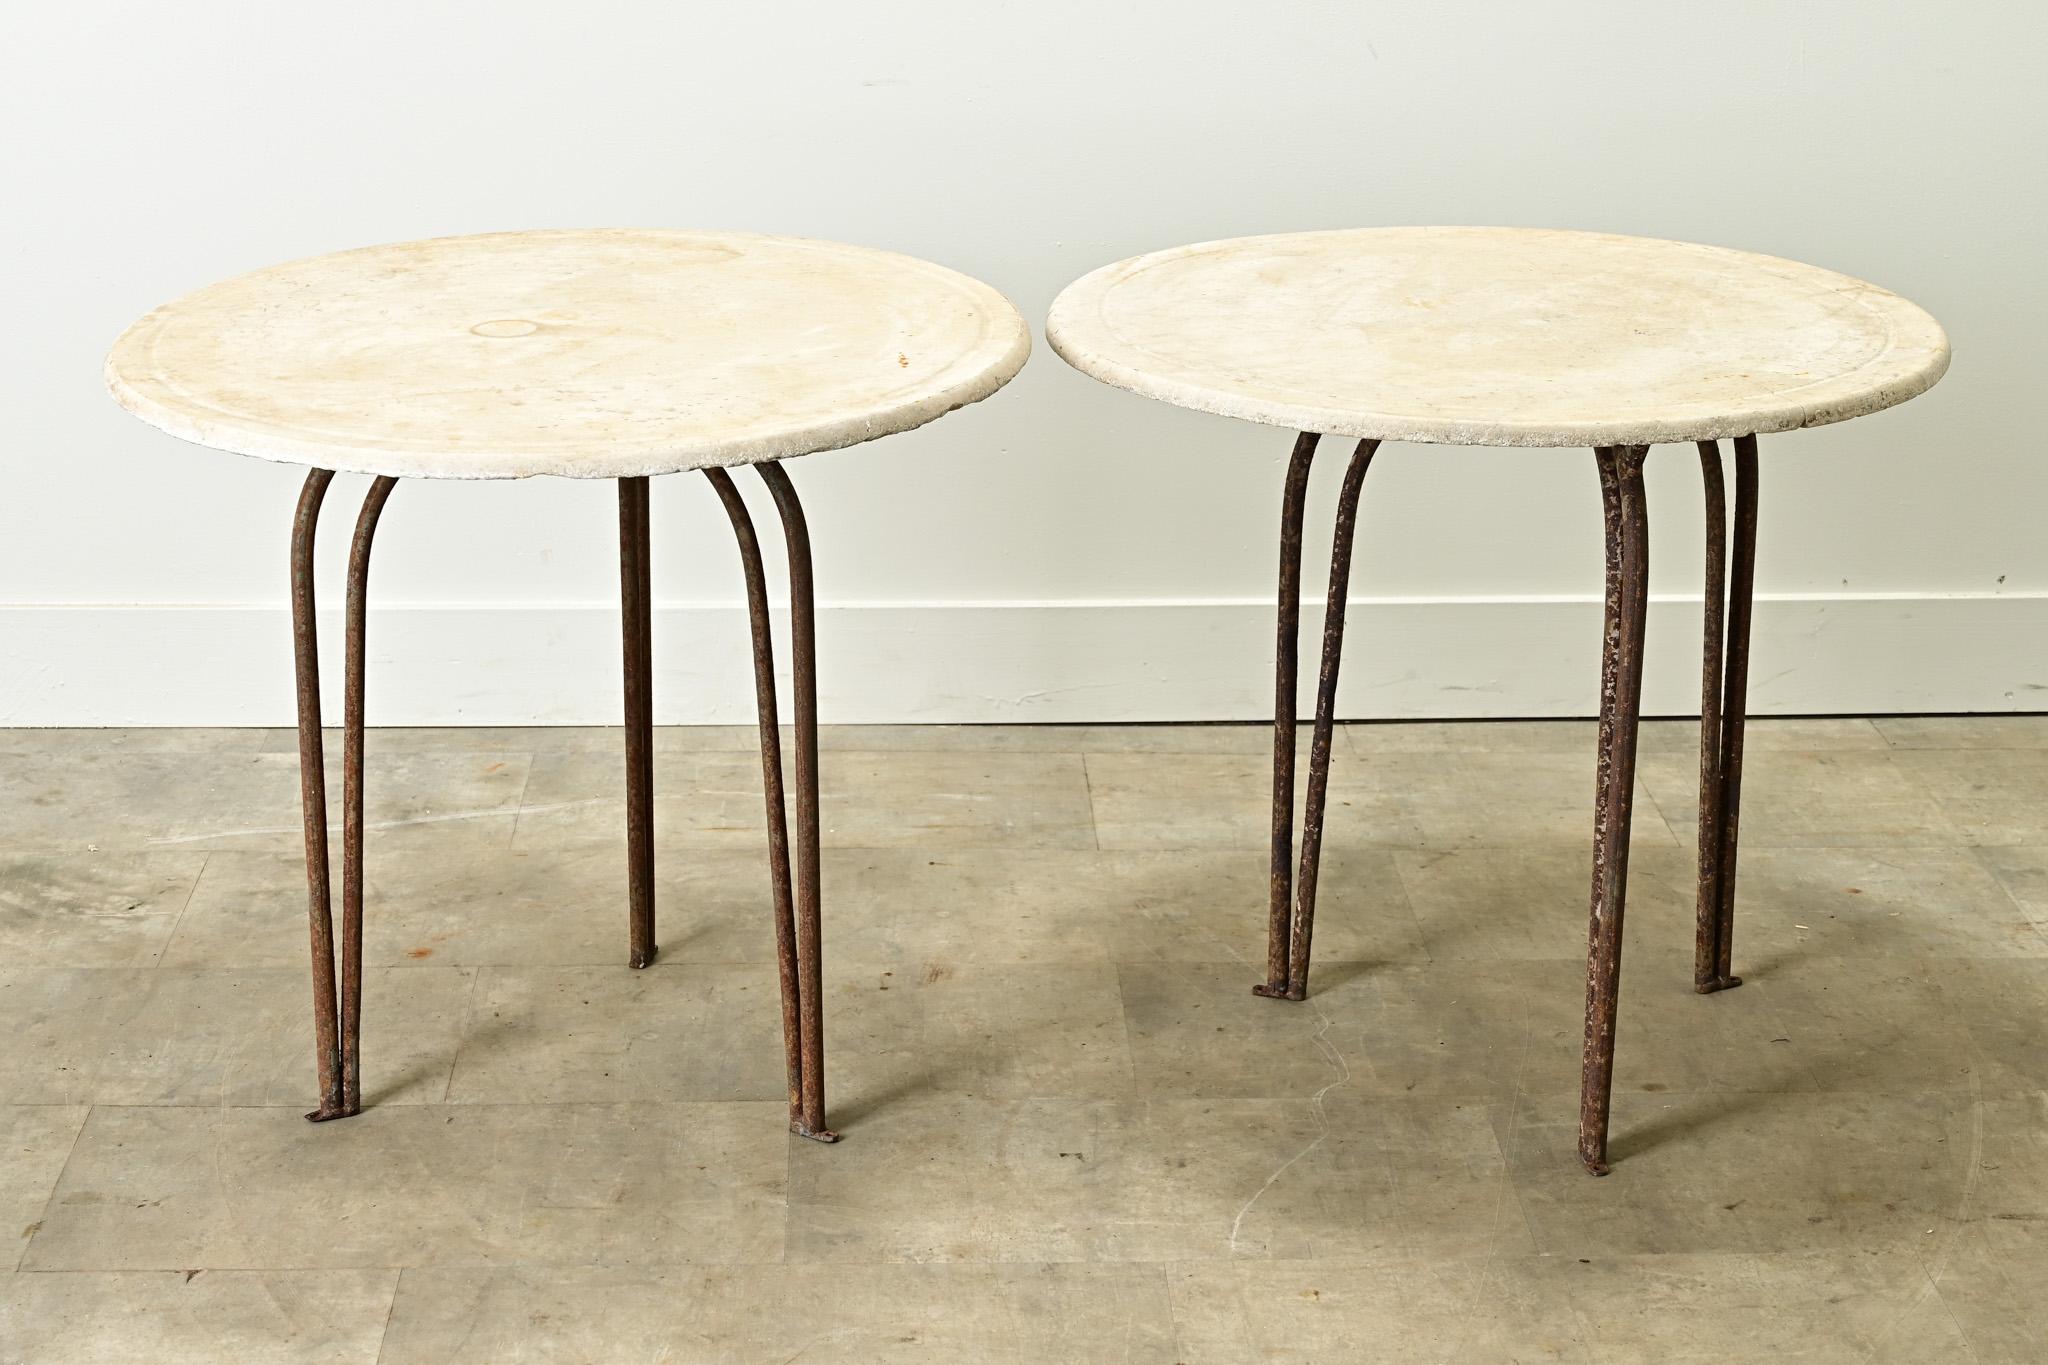 An impressive pair of Art Deco style round marble top tables. Married over time, the worn marble top and iron base pair well together. The white marble top is smooth and has a lot of patina, the iron base has a raw iron finish and boosts lots of